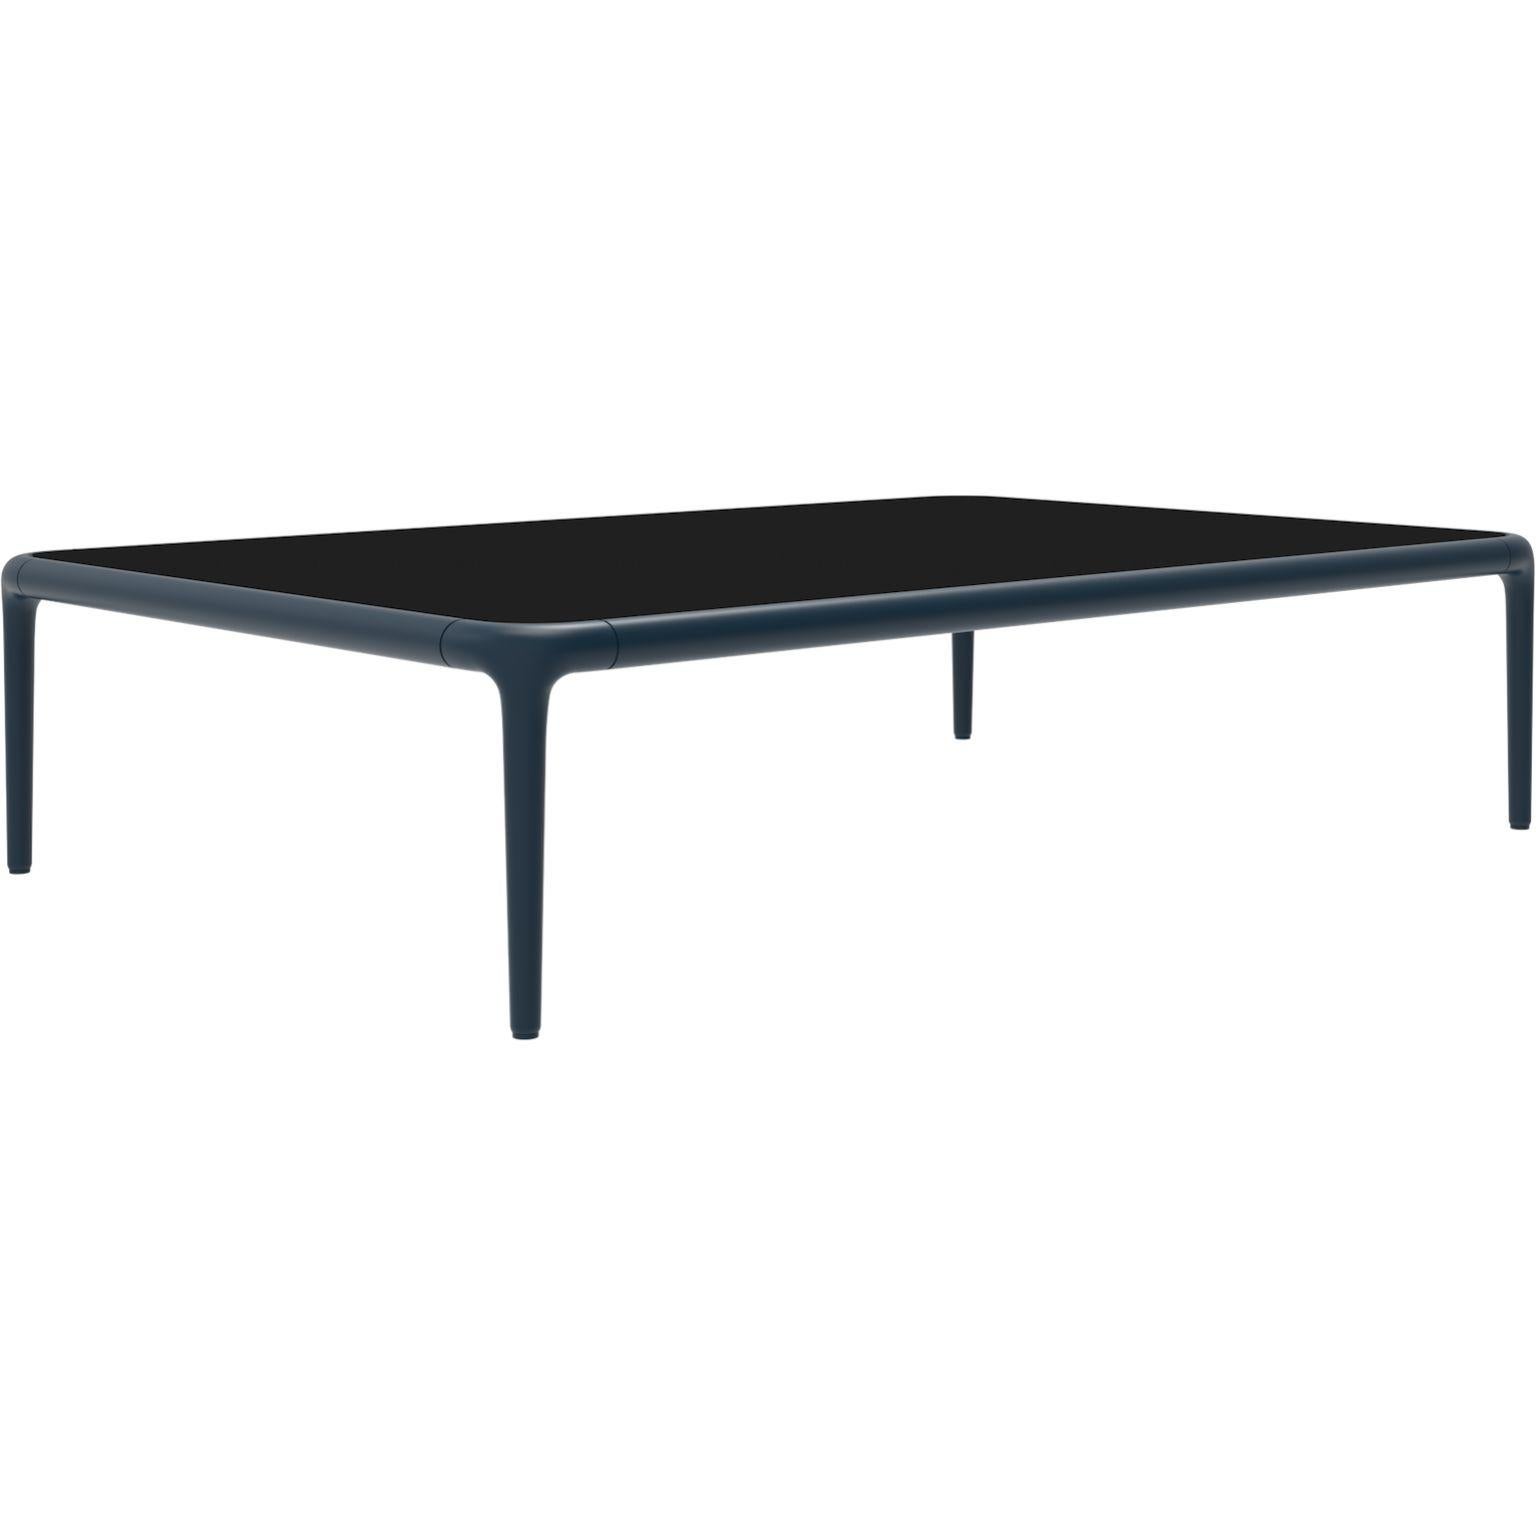 Xaloc navy coffee table 120 with glass Top by Mowee.
Dimensions: D120 x W80 x H28 cm.
Materials: Aluminum, tinted tempered glass top.
Also available in different aluminum colors and finishes (HPL Black Edge or Neolith).

Xaloc synthesizes the